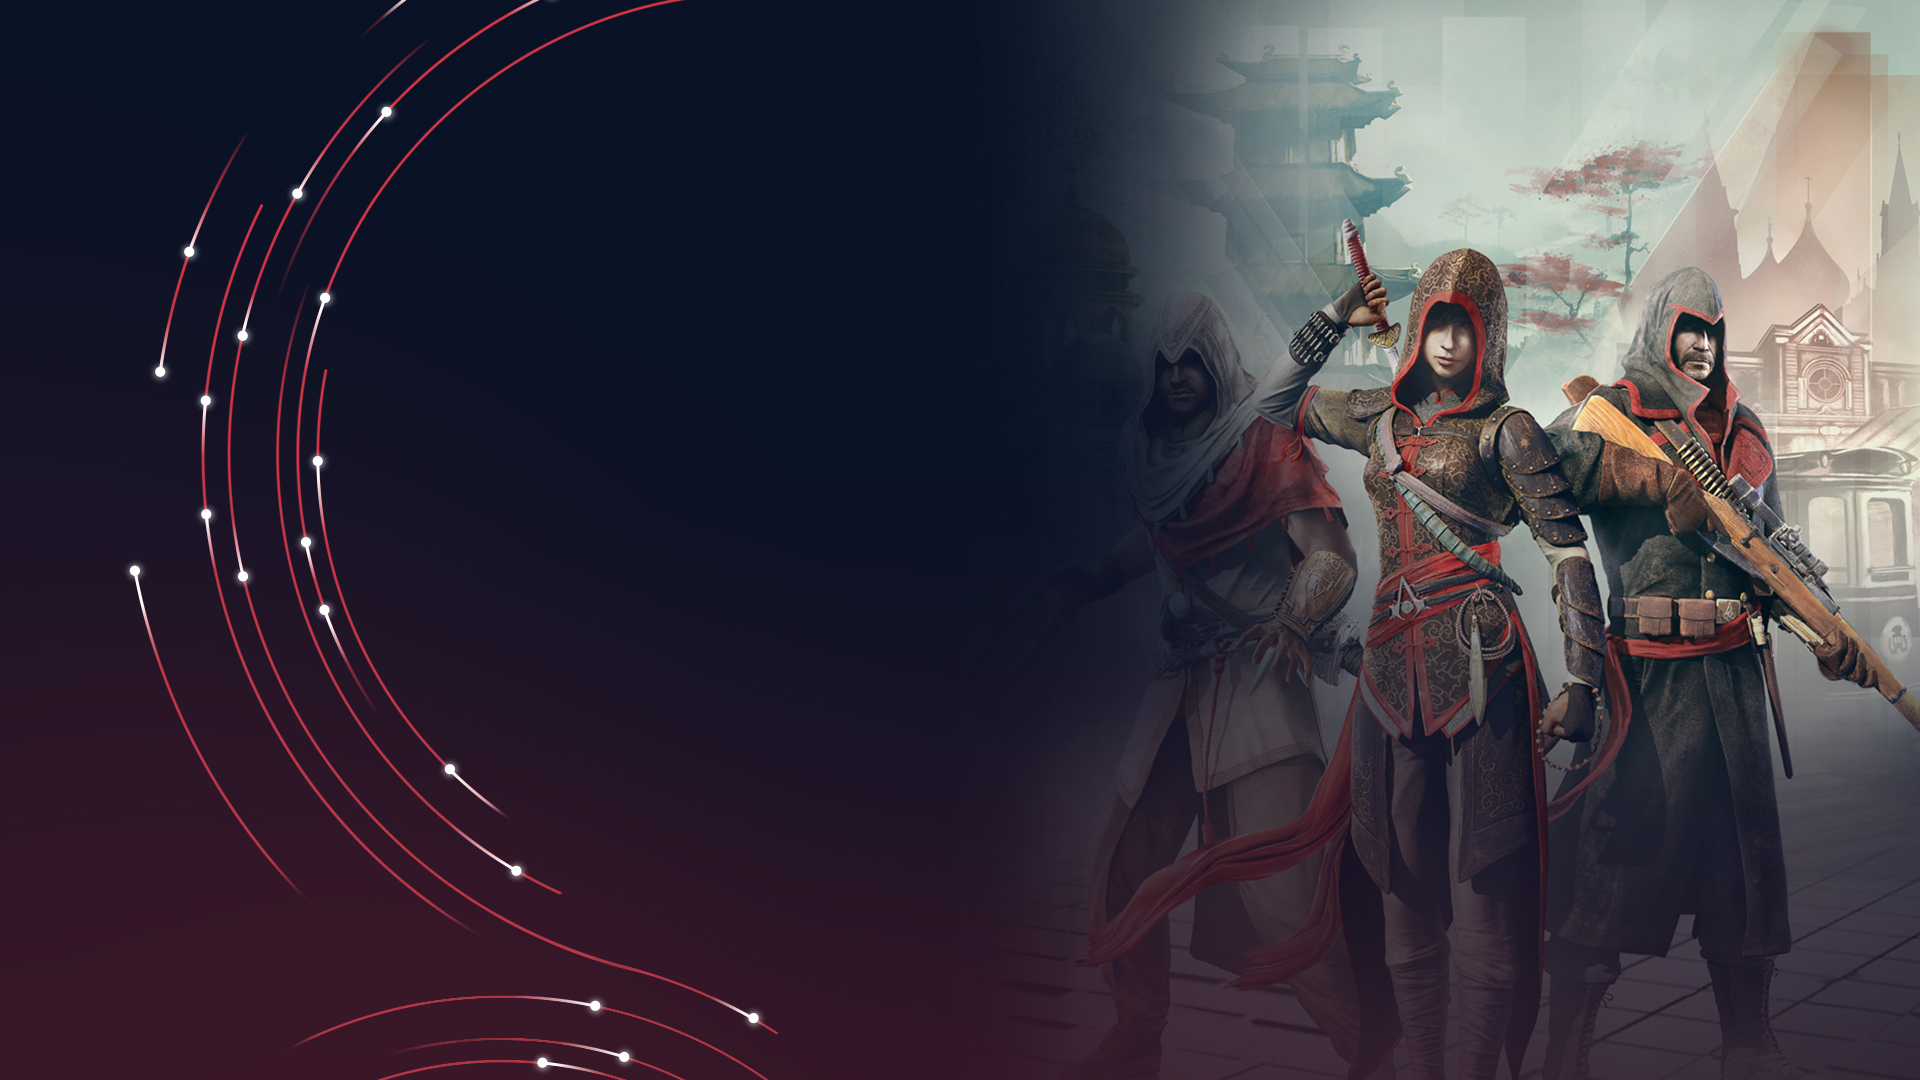 Video Game Assassin's Creed Chronicles: China HD Wallpaper